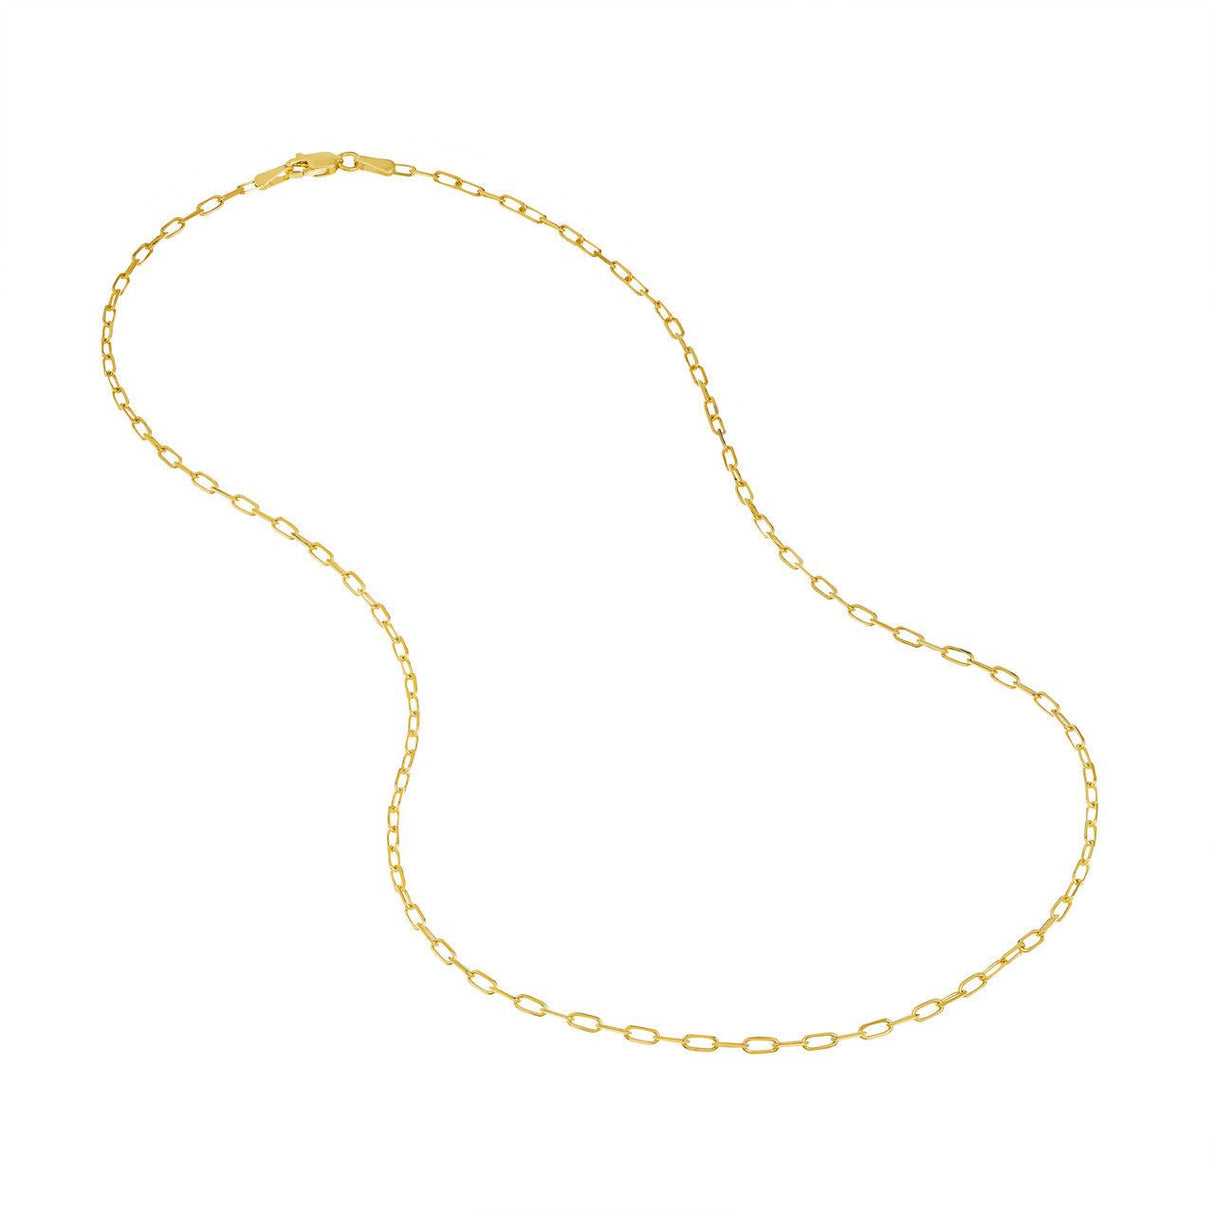 14K Gold Chain, 22", 1.95mm D/C Paper Clip Chain with Lobster Lock, Gold Layered Chains, Gold Chain Necklace, - Diamond Origin